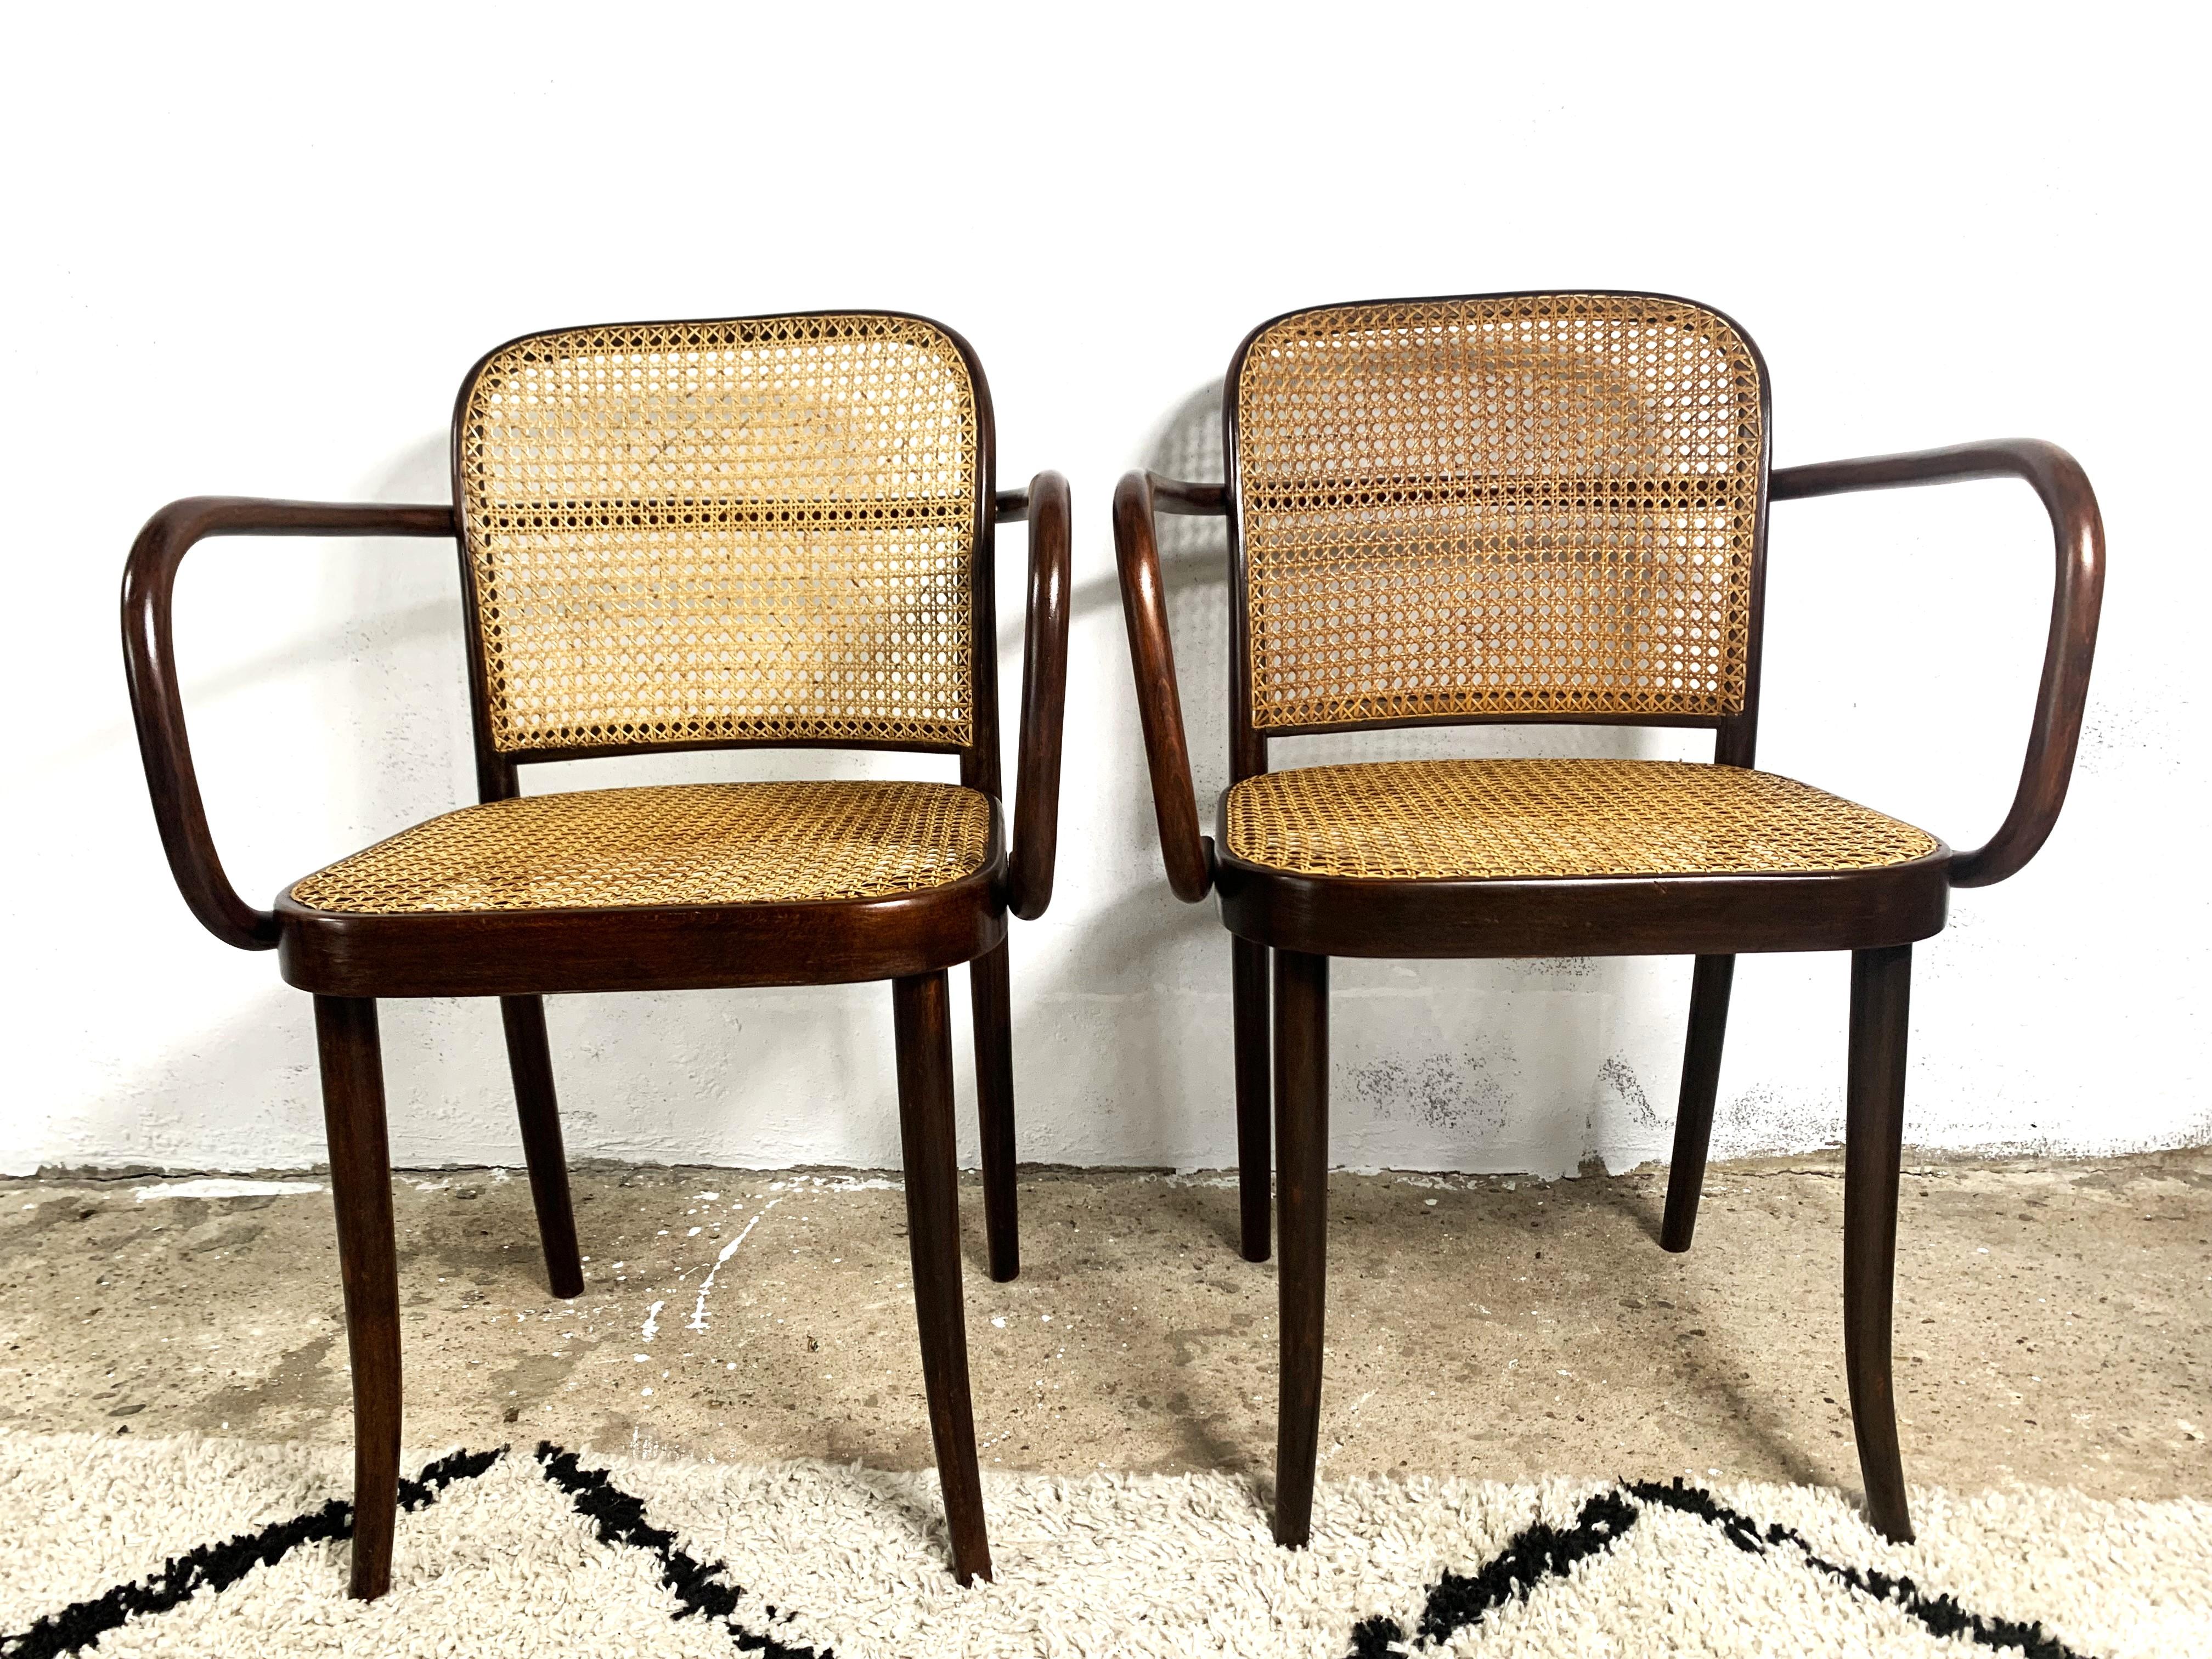 Thonet A811, 1930s, Rattan, Vintage - set of 2 For Sale 10